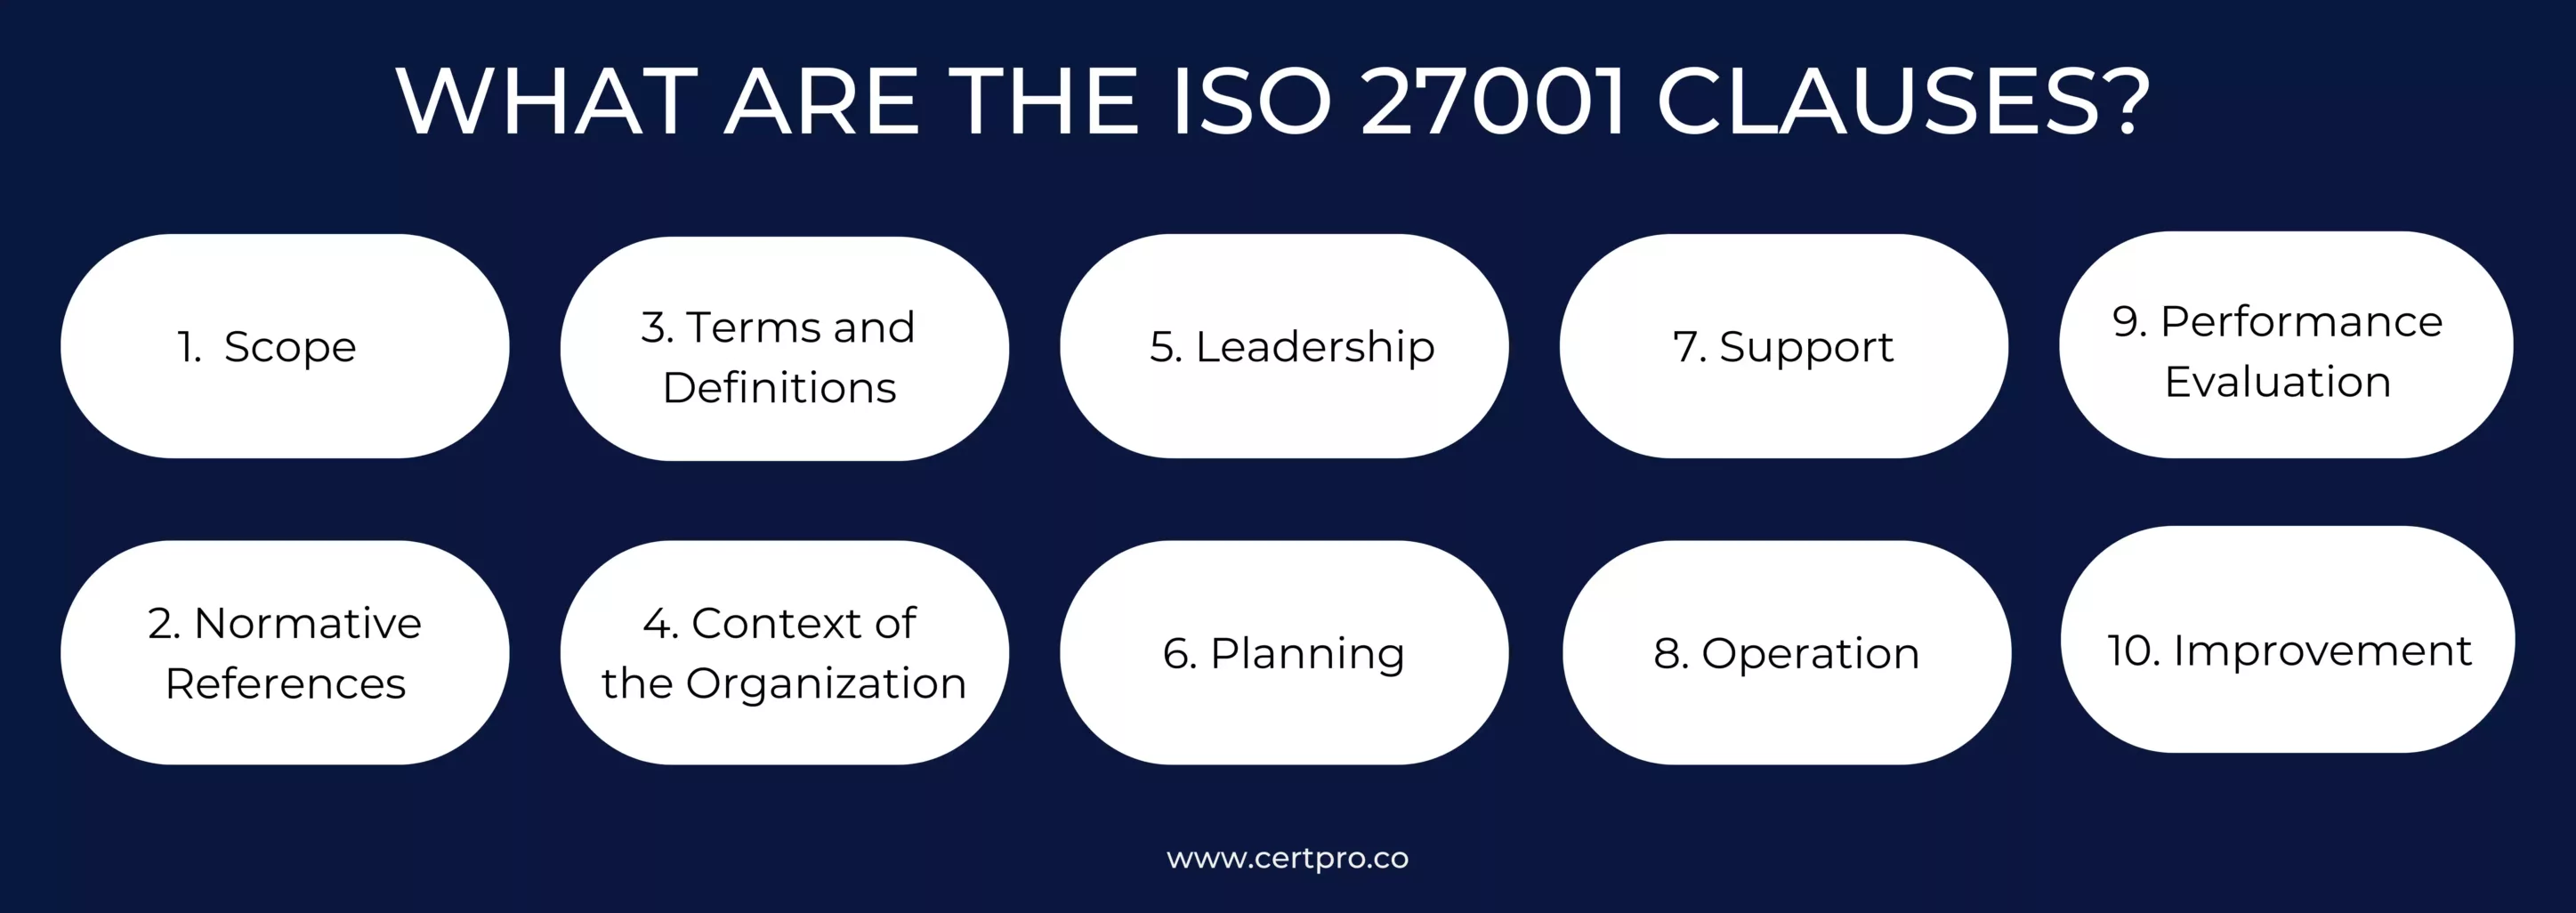 WHAT ARE THE ISO 27001 CLAUSES